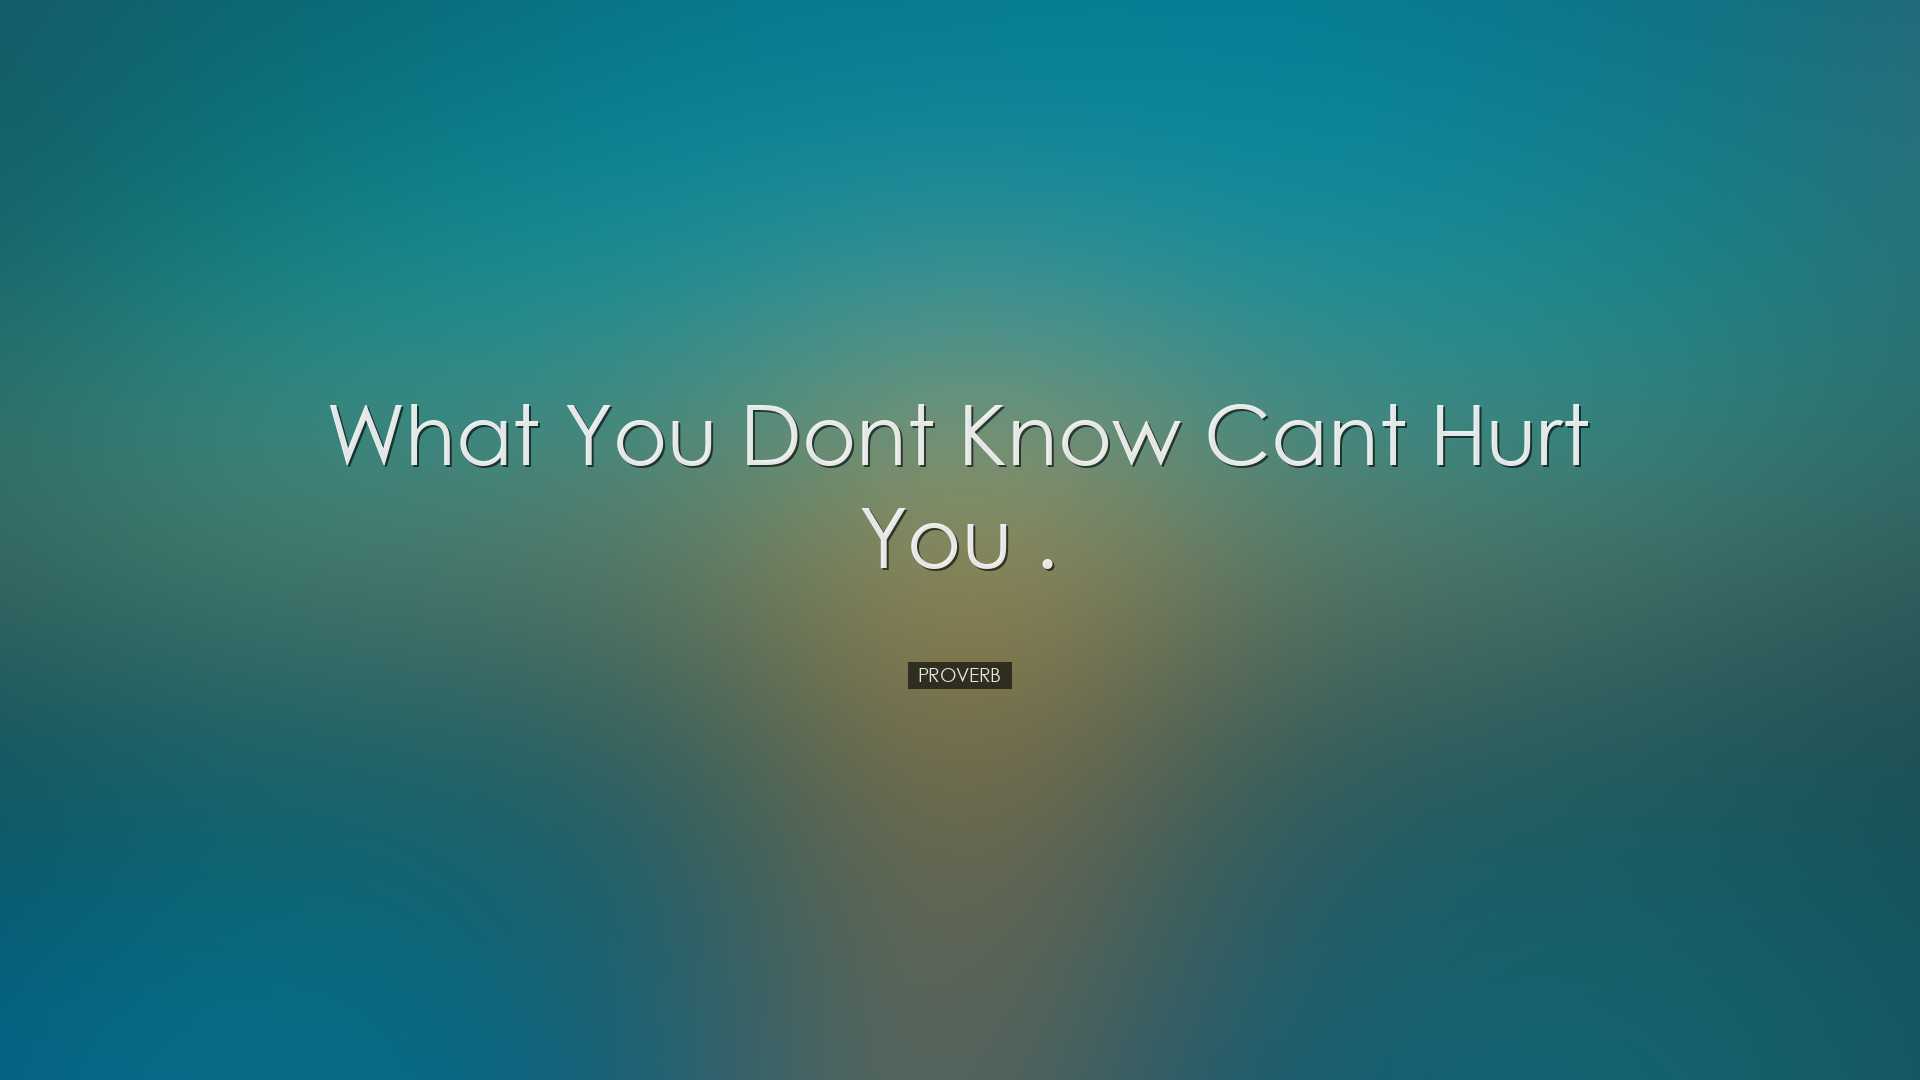 What you dont know cant hurt you . - Proverb